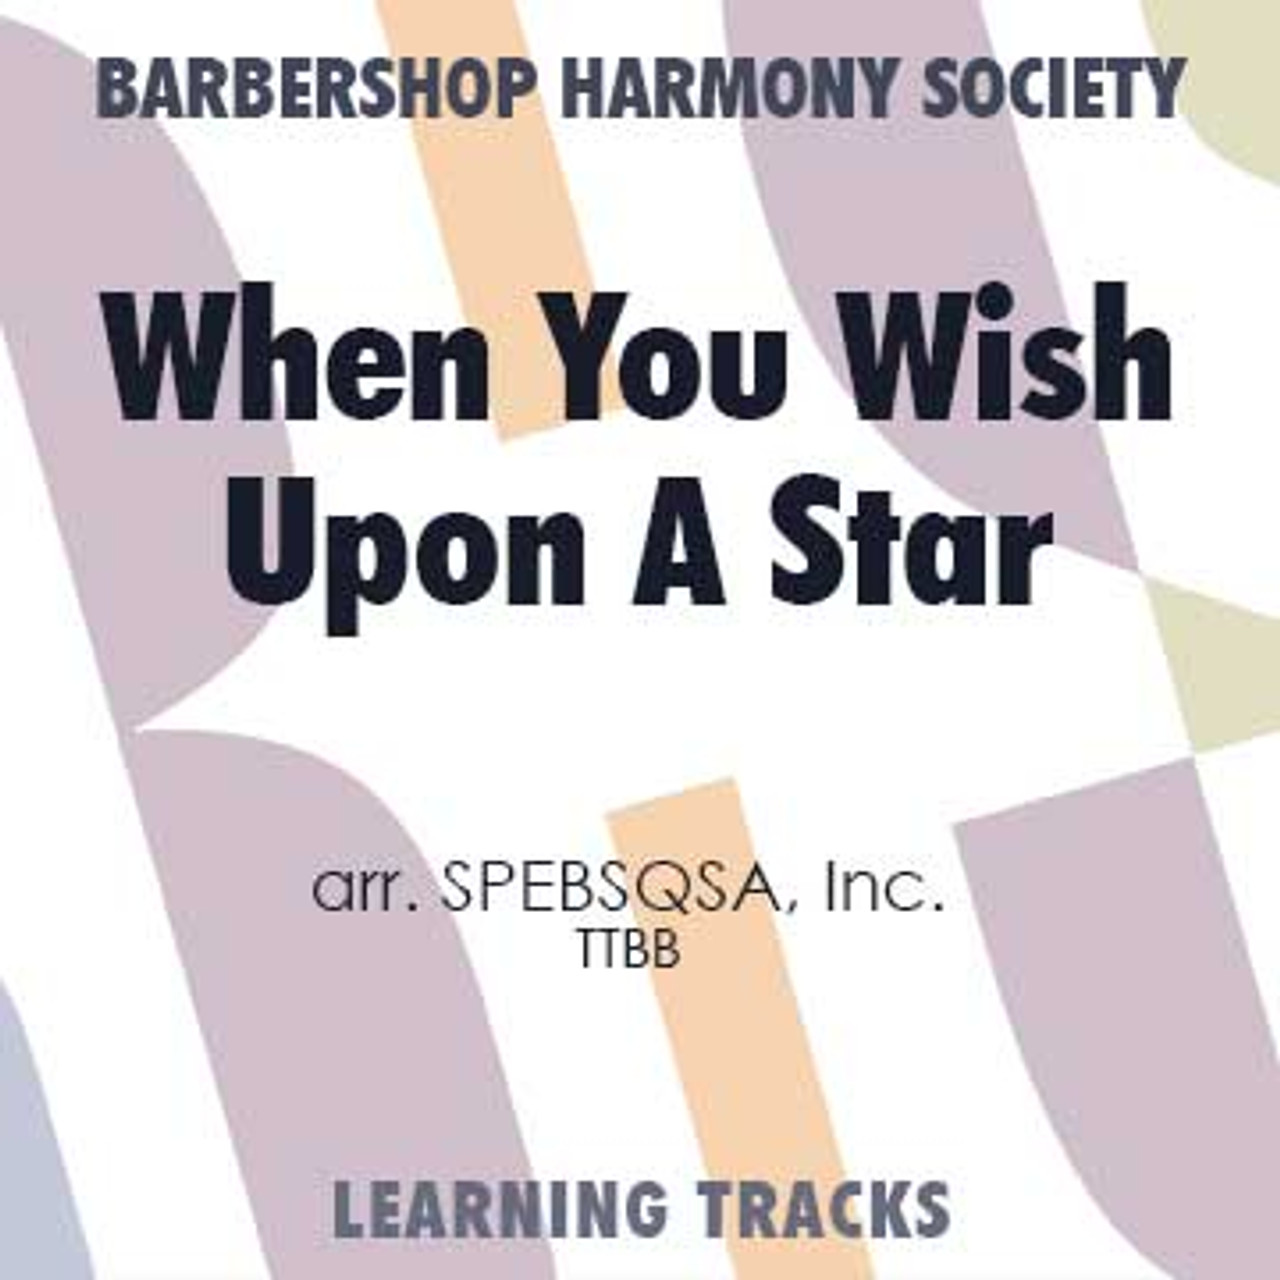 When You Wish Upon A Star (TTBB) (arr. SPEBSQSA) - Digital Learning Tracks for 7670